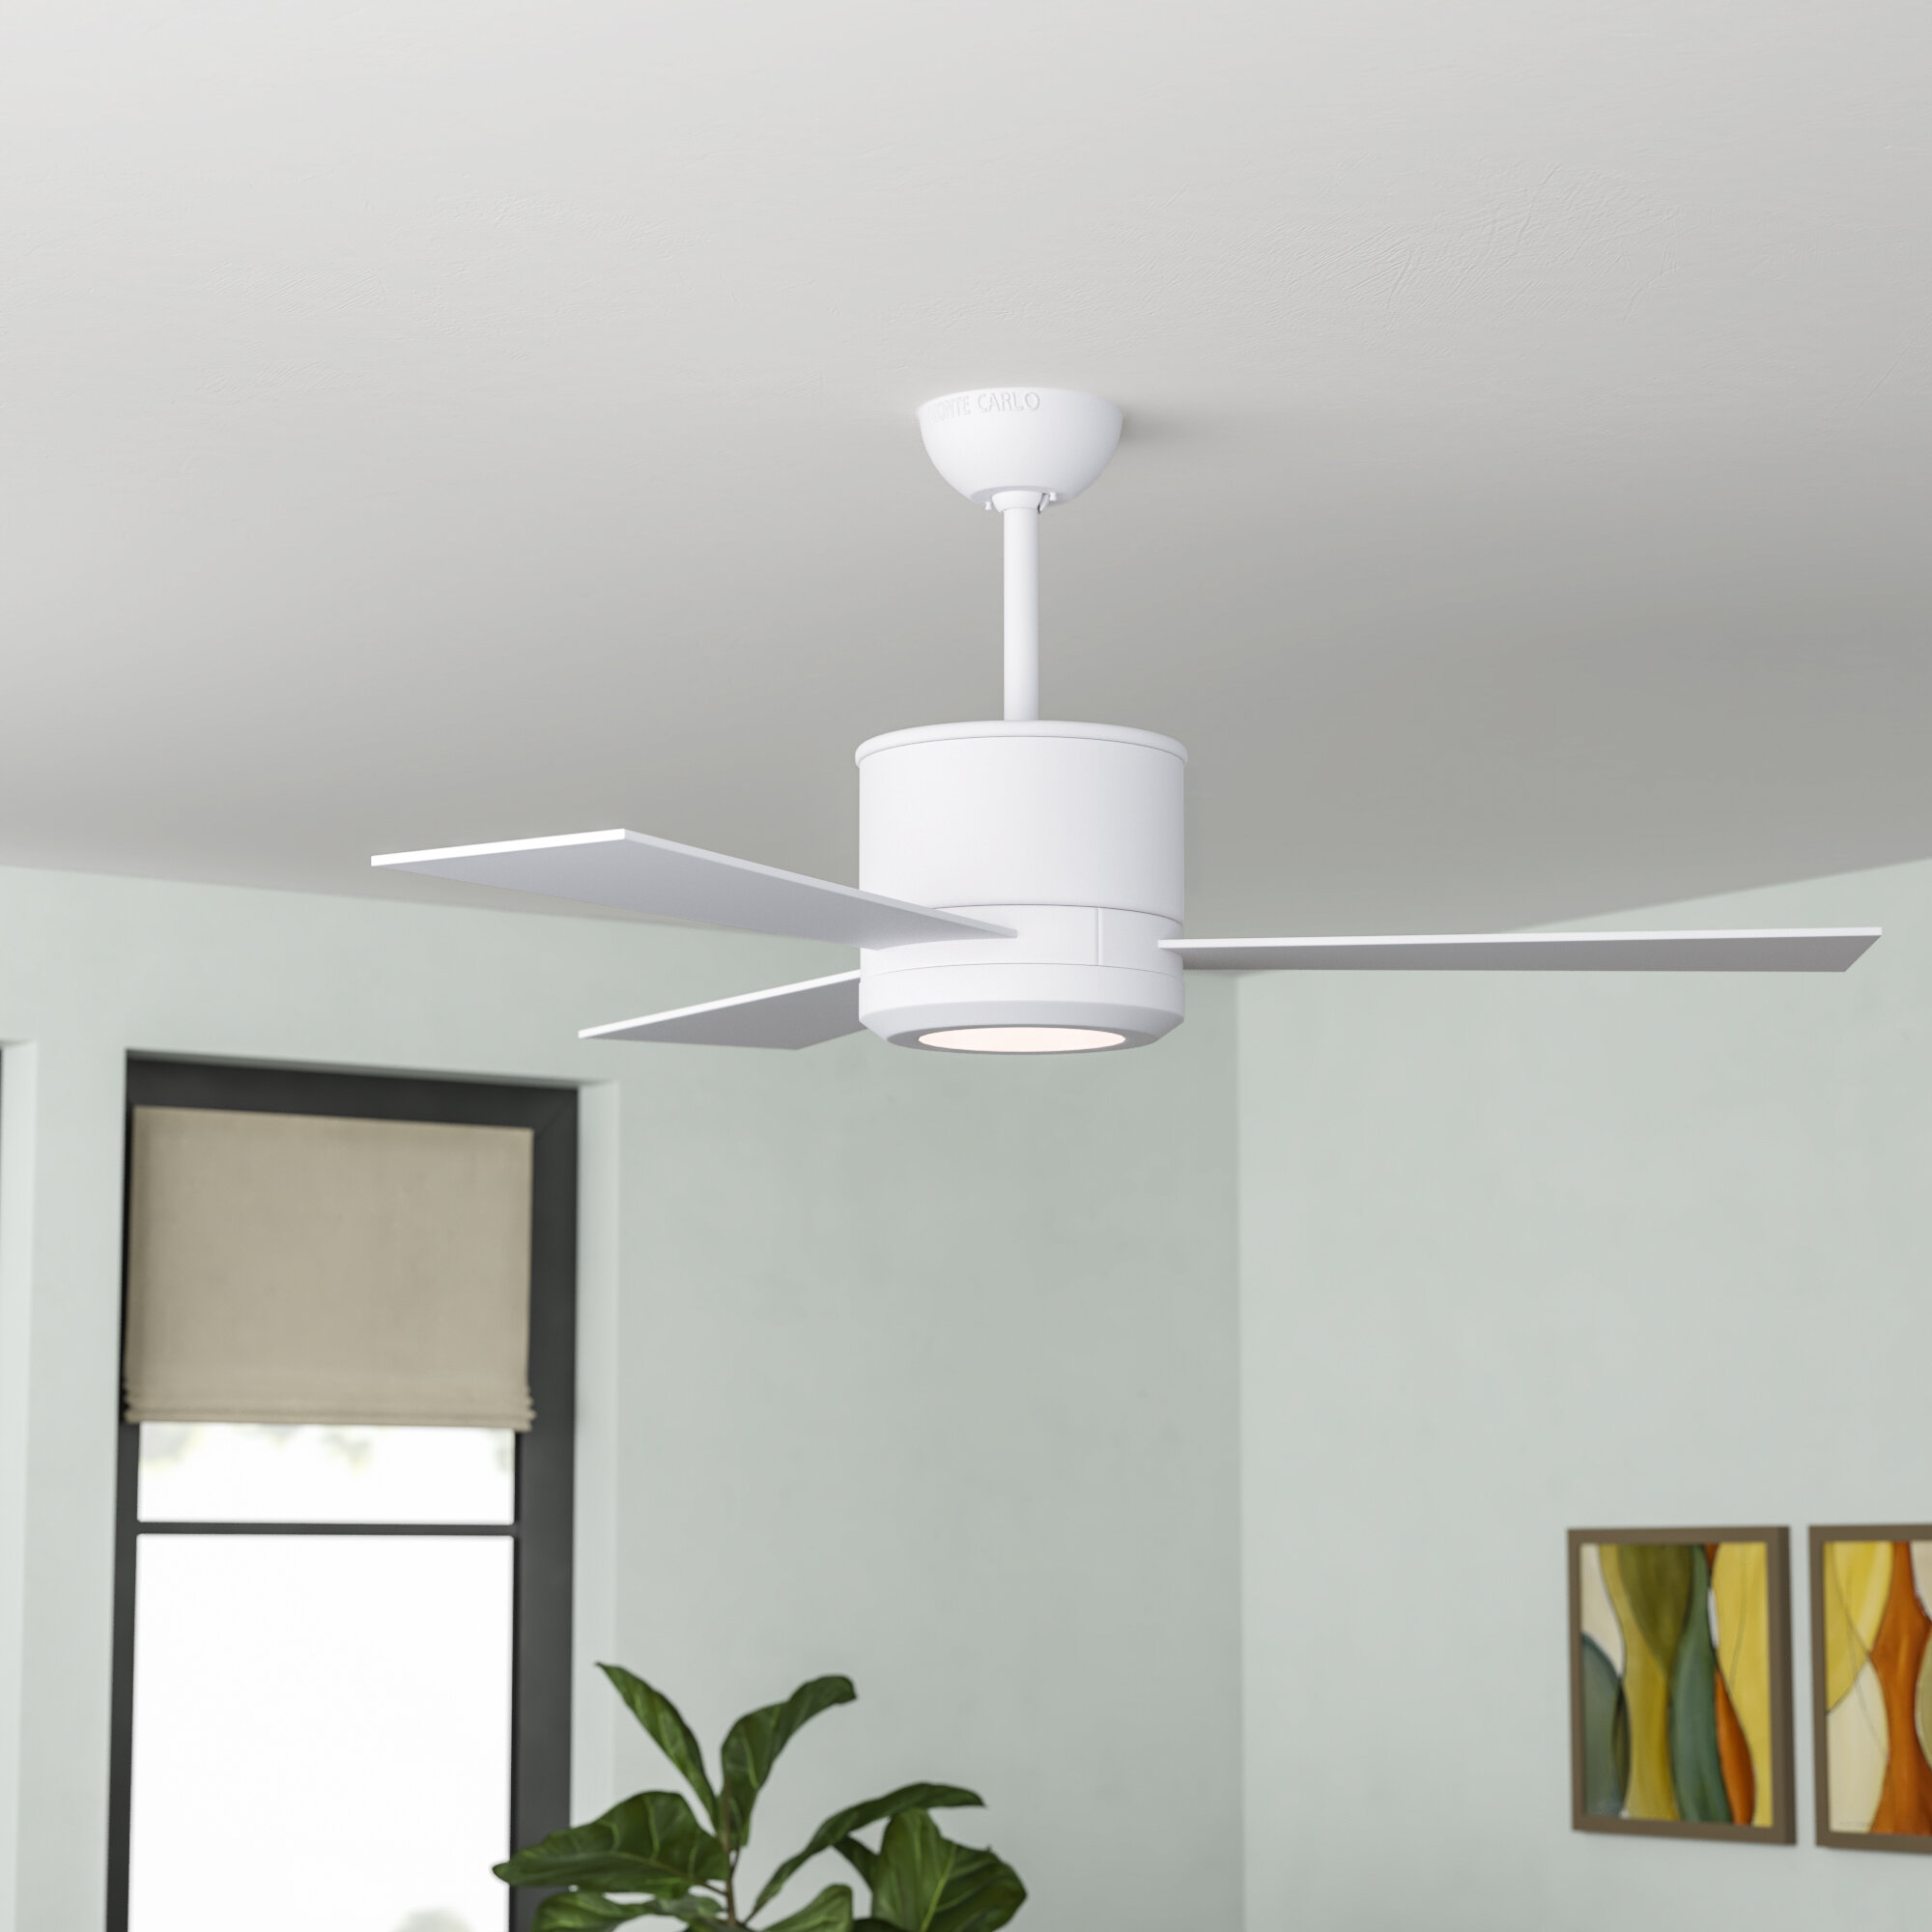 Ivy Bronx 42 Fort Hamilton 3 Blade Led Ceiling Fan With Remote